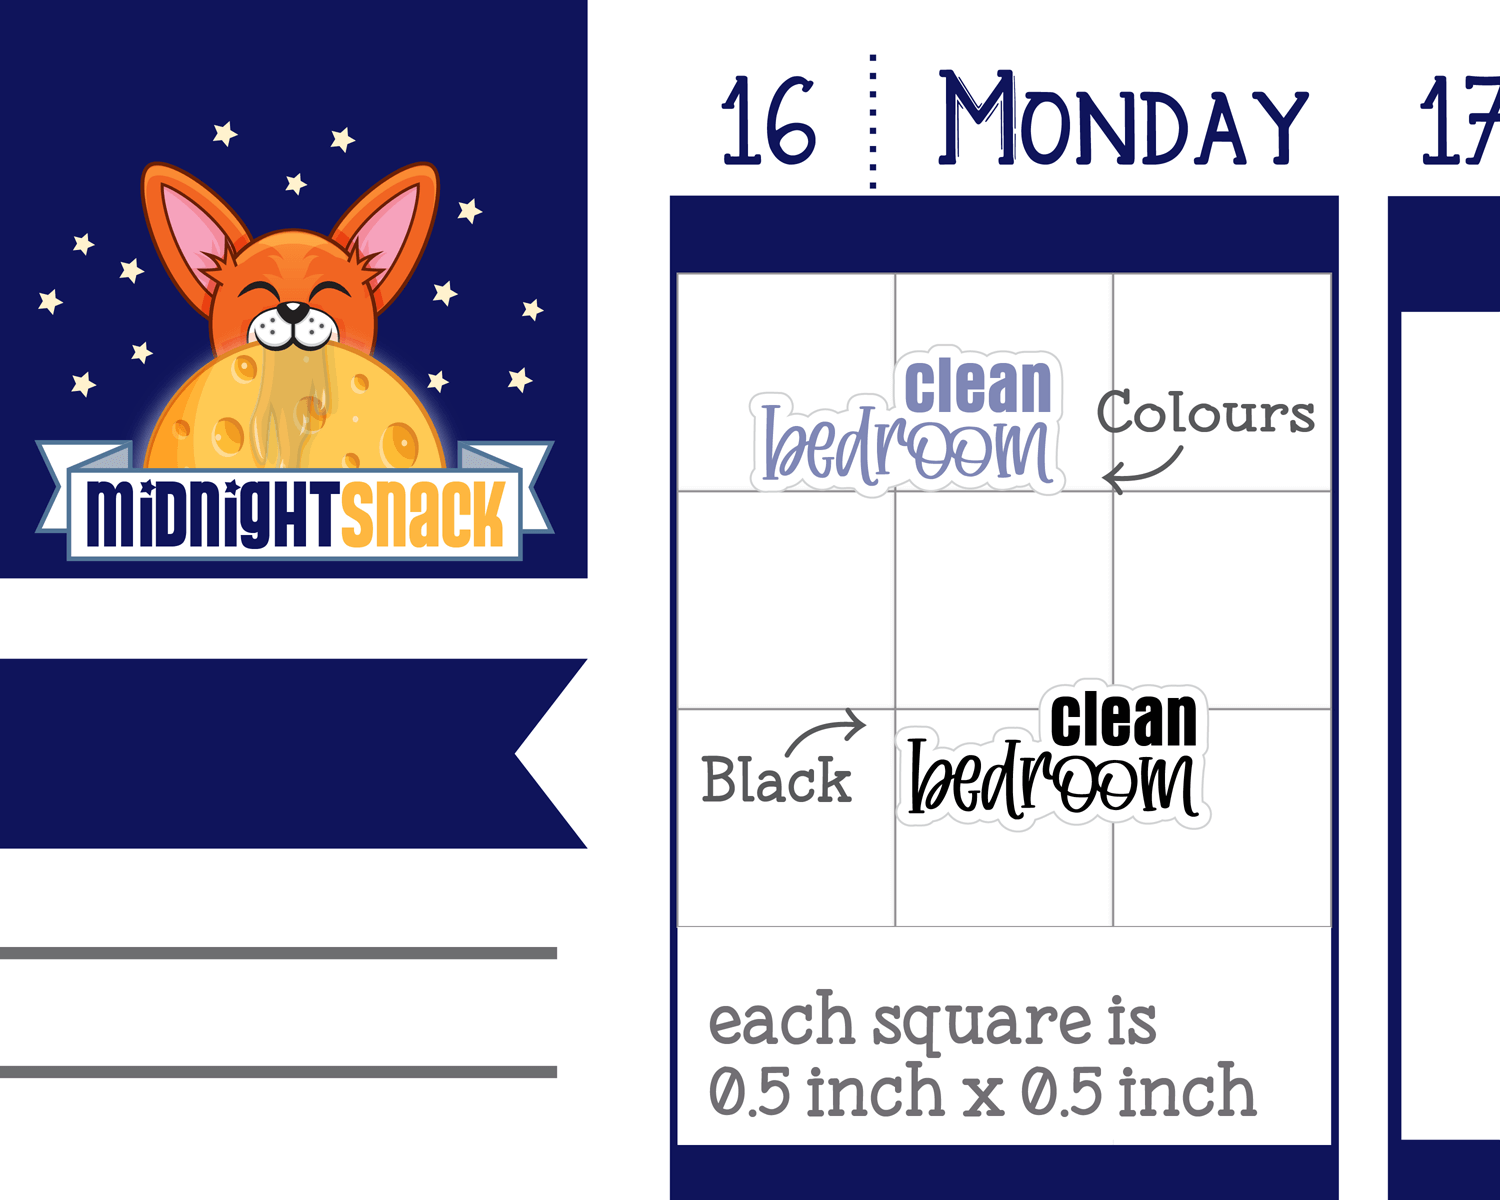 Clean Bedroom Script Planner Stickers: Household Chores Reminder